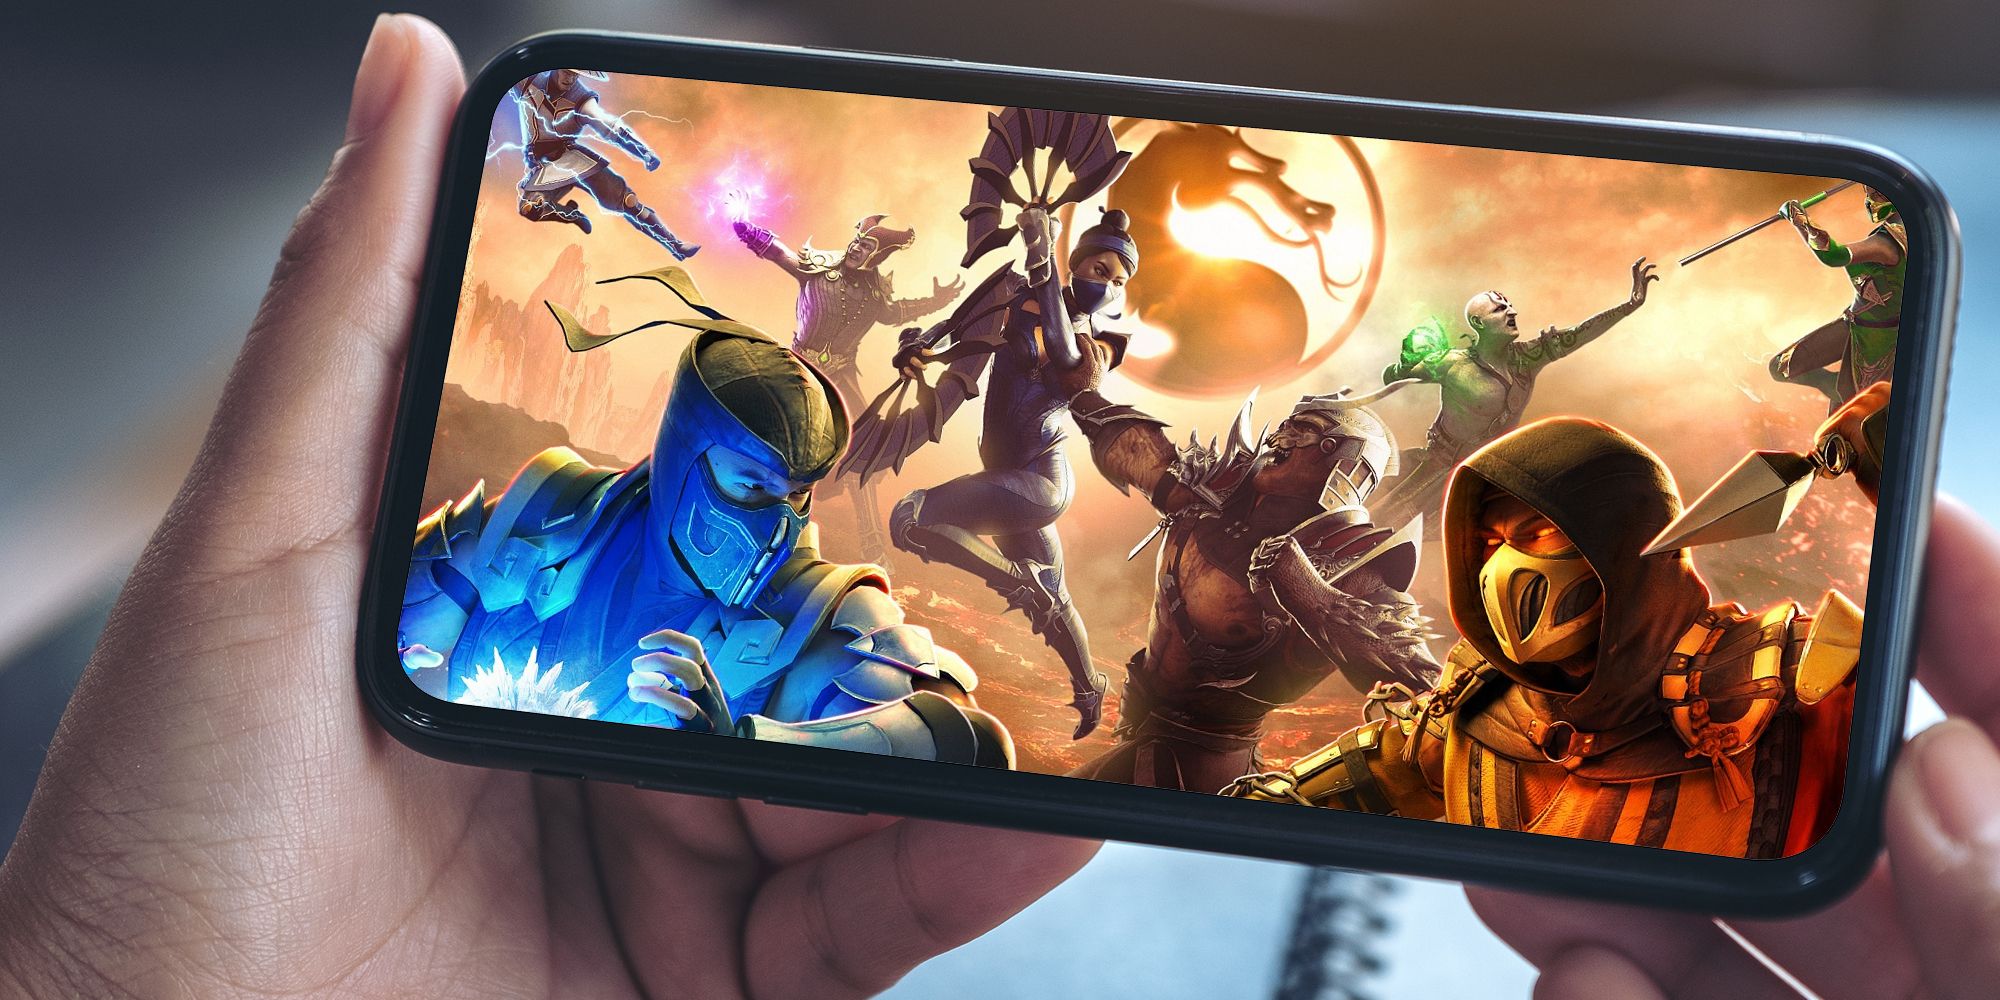 Mortal Kombat Onslaught Promises Cinematic RPG Experience On Mobile In 2023